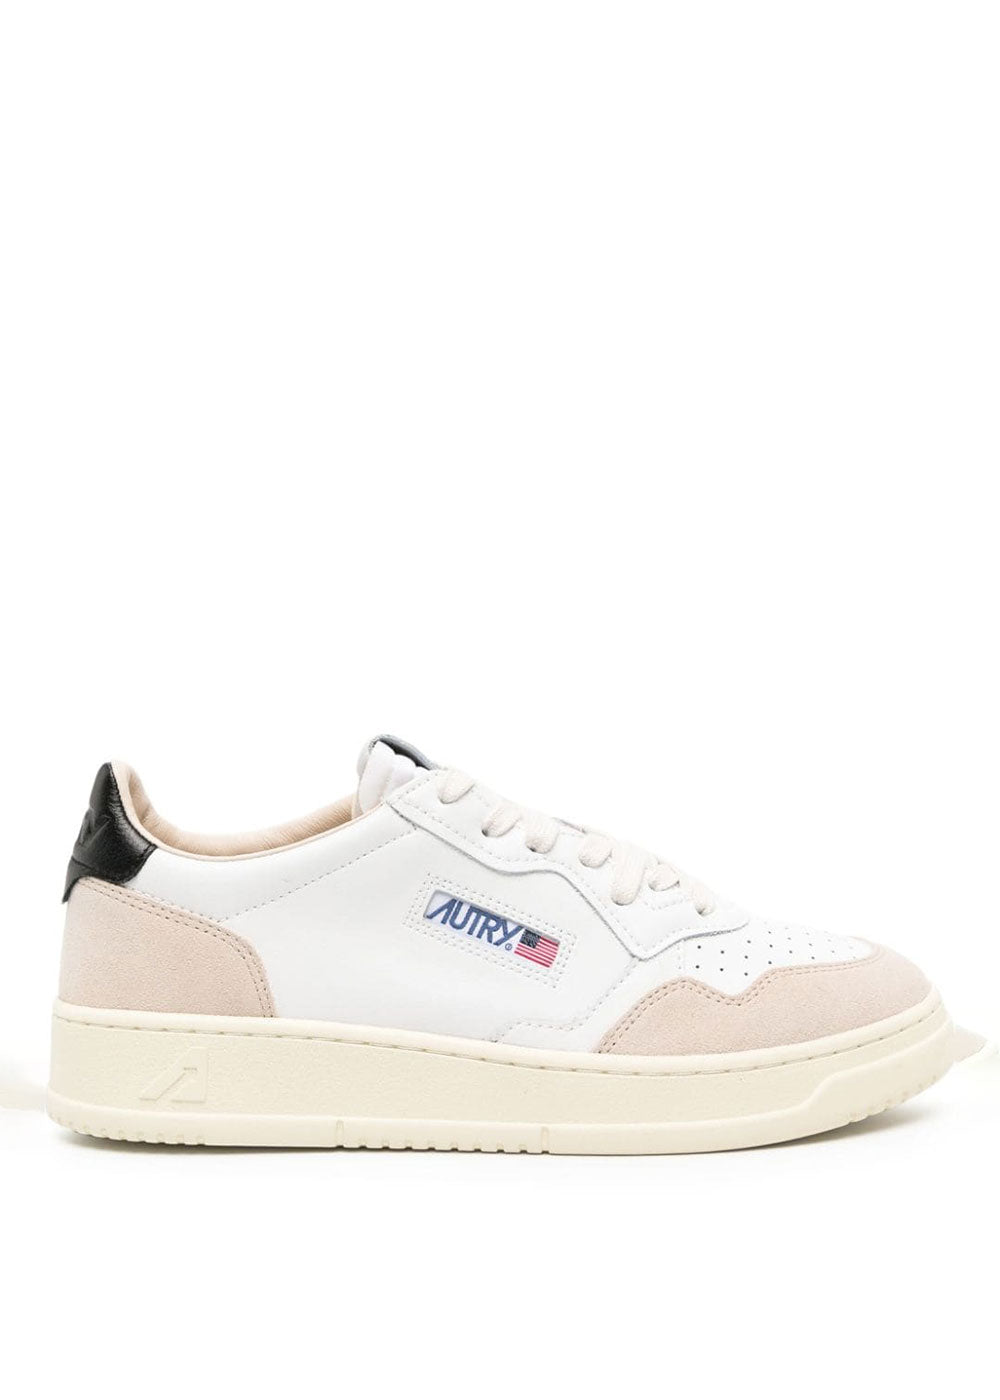 Autry Medalist Leather & Suede Sneakers - White / Black